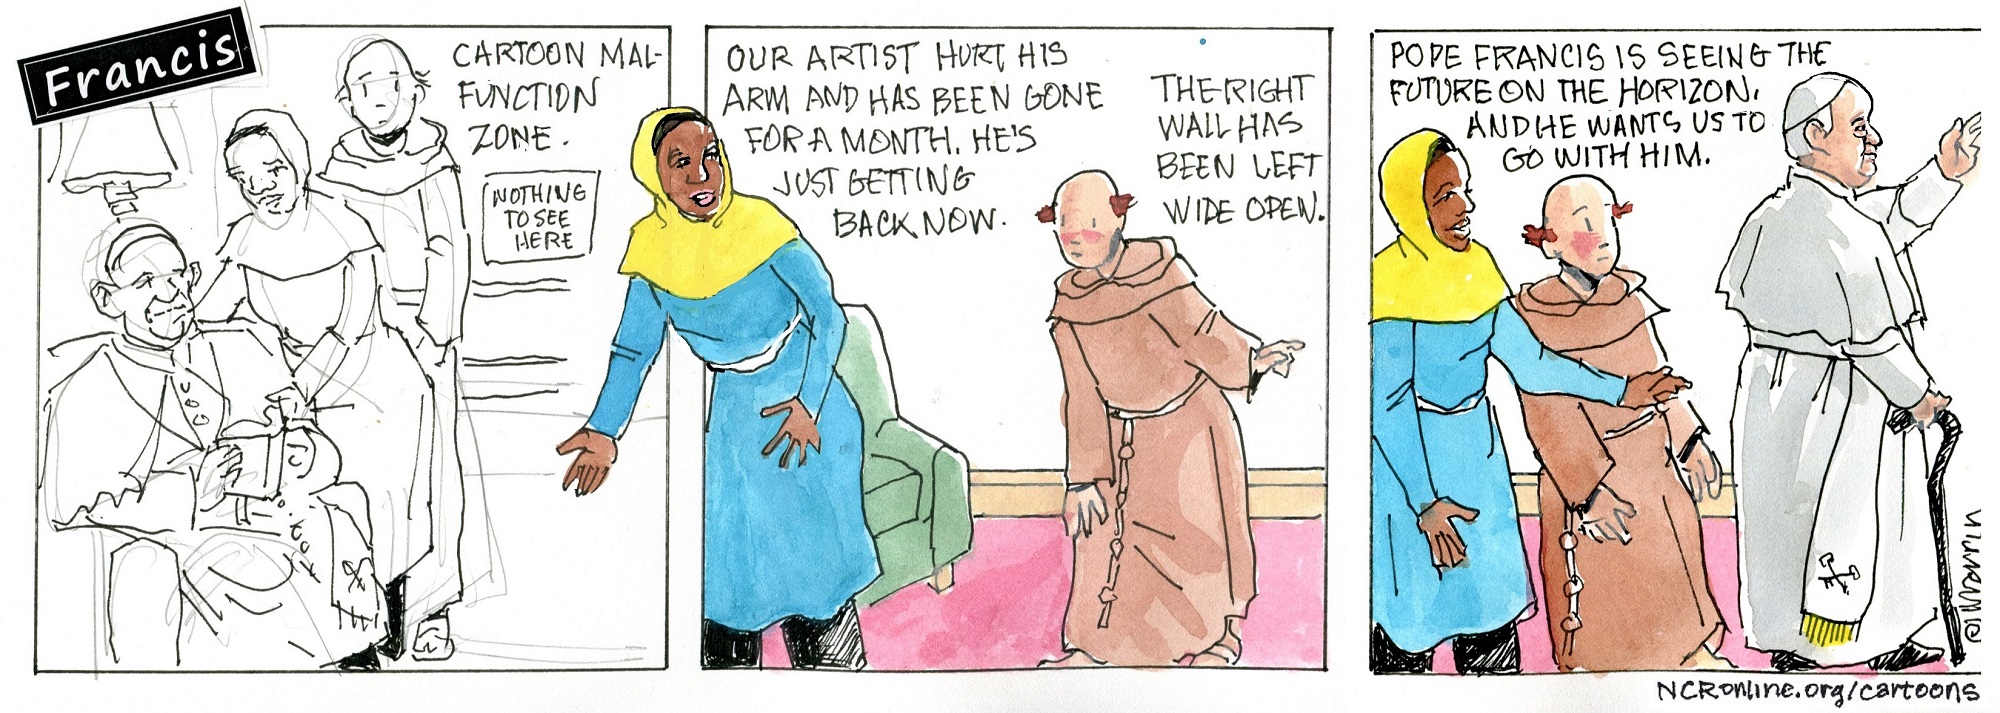 The cartoonist returns. But where is Pope Francis going?